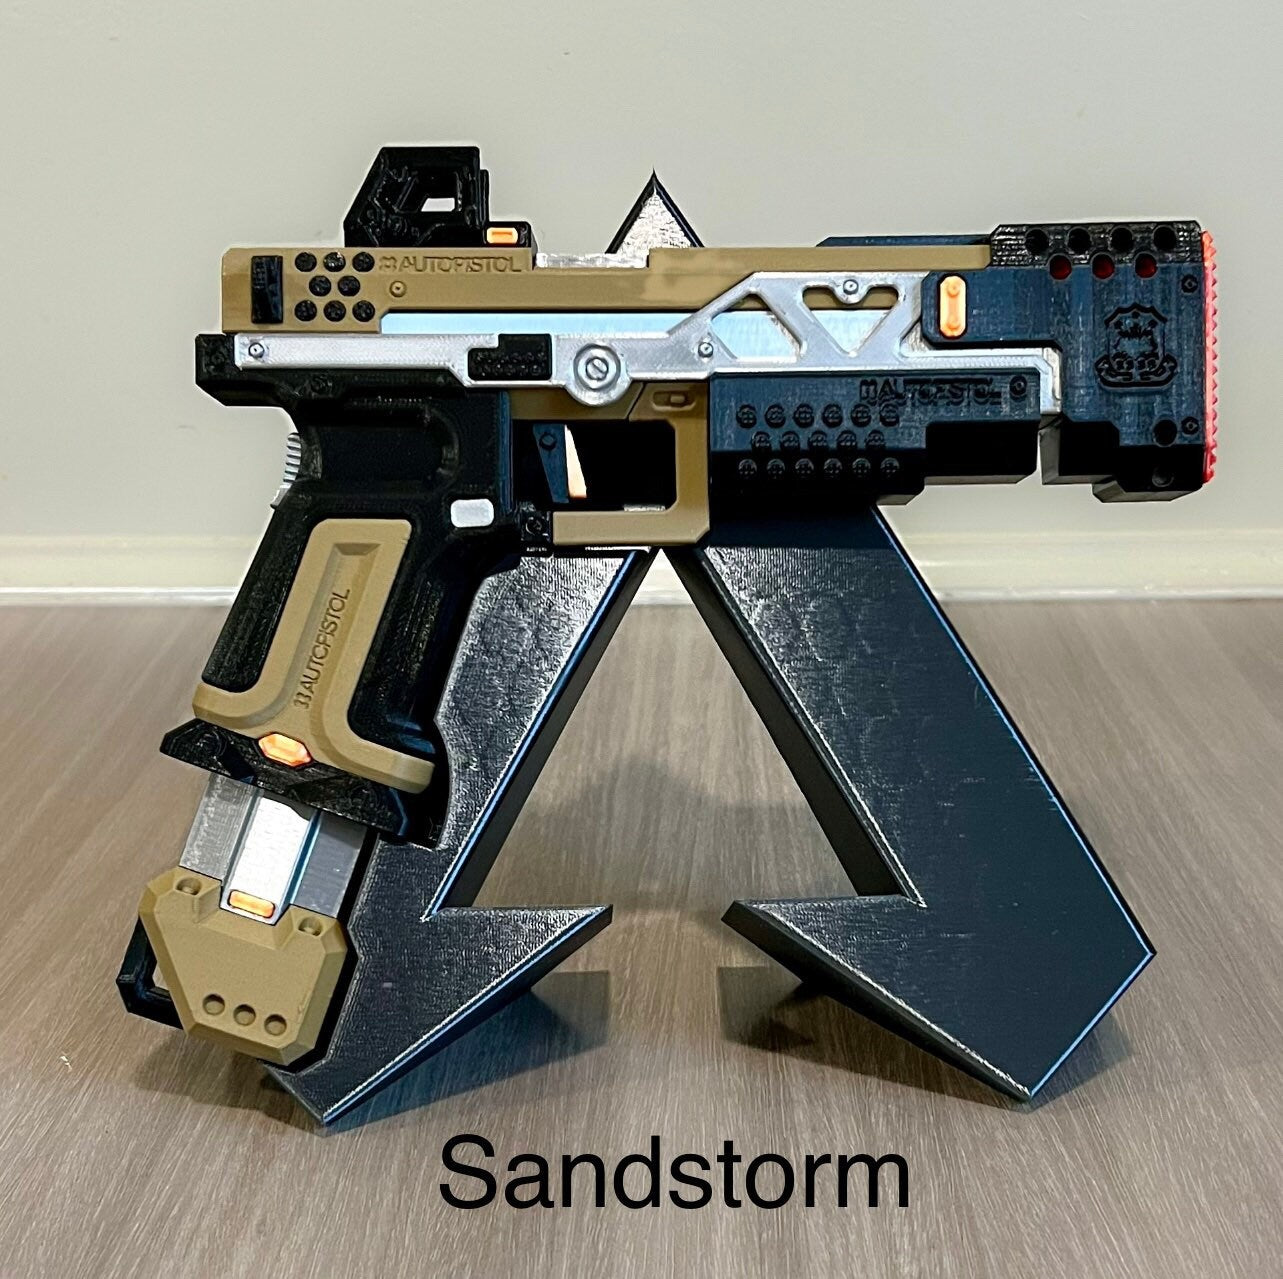 Apex Legends RE-45 Cosplay Replica With Stand, Larp Props Replica, Wingman, Post Apocalyptic Larp Weapon, Cyberpunk Cosplay Prop Weapon